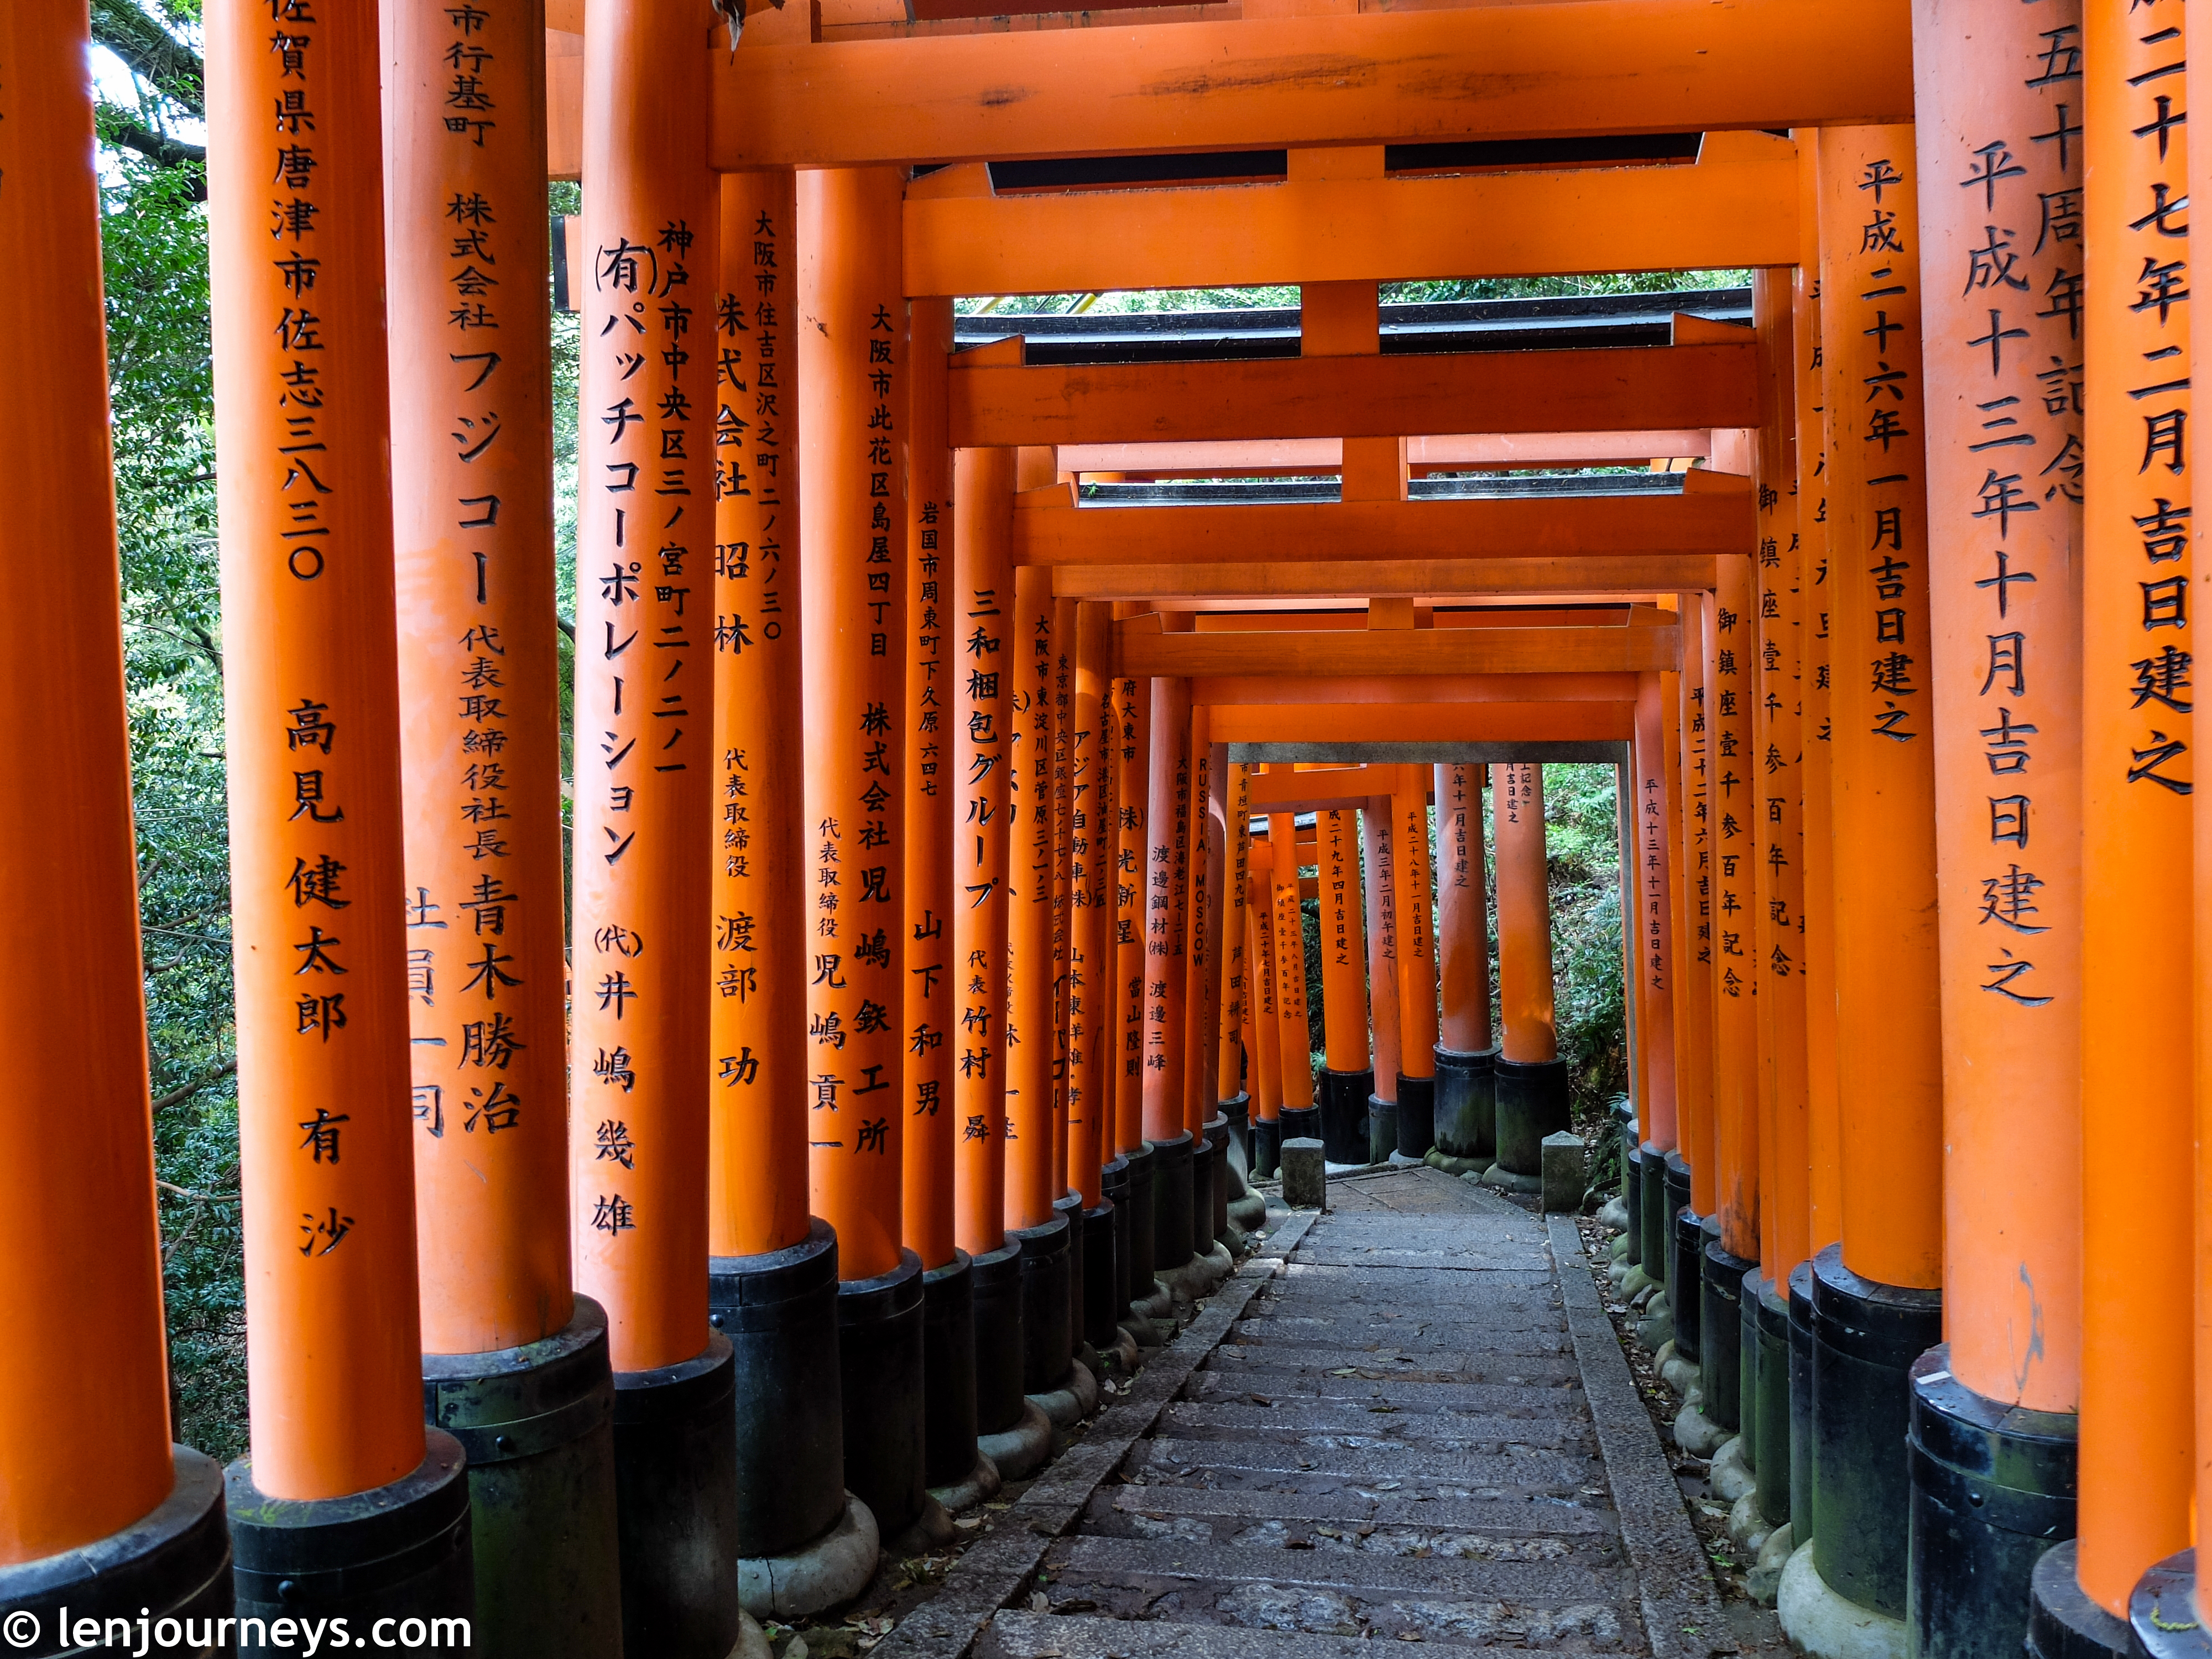 Torii-covered path, Kyoto